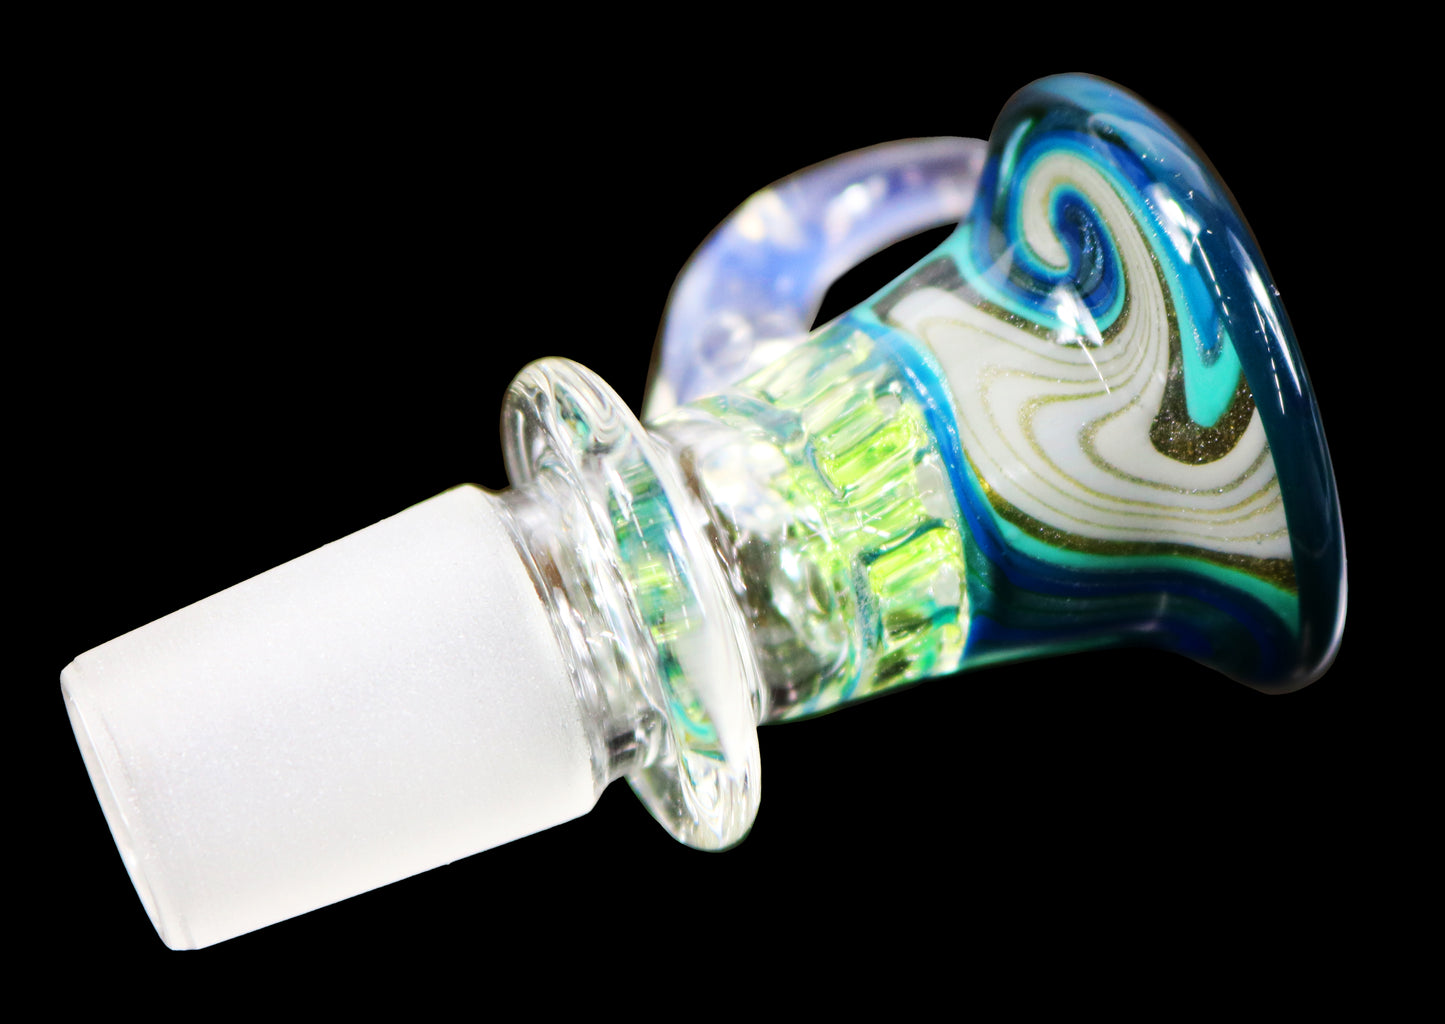 19mm Martini Slide with built in screen from Glass by Slick- Teal/Transparent Blue/Glow in the Dark